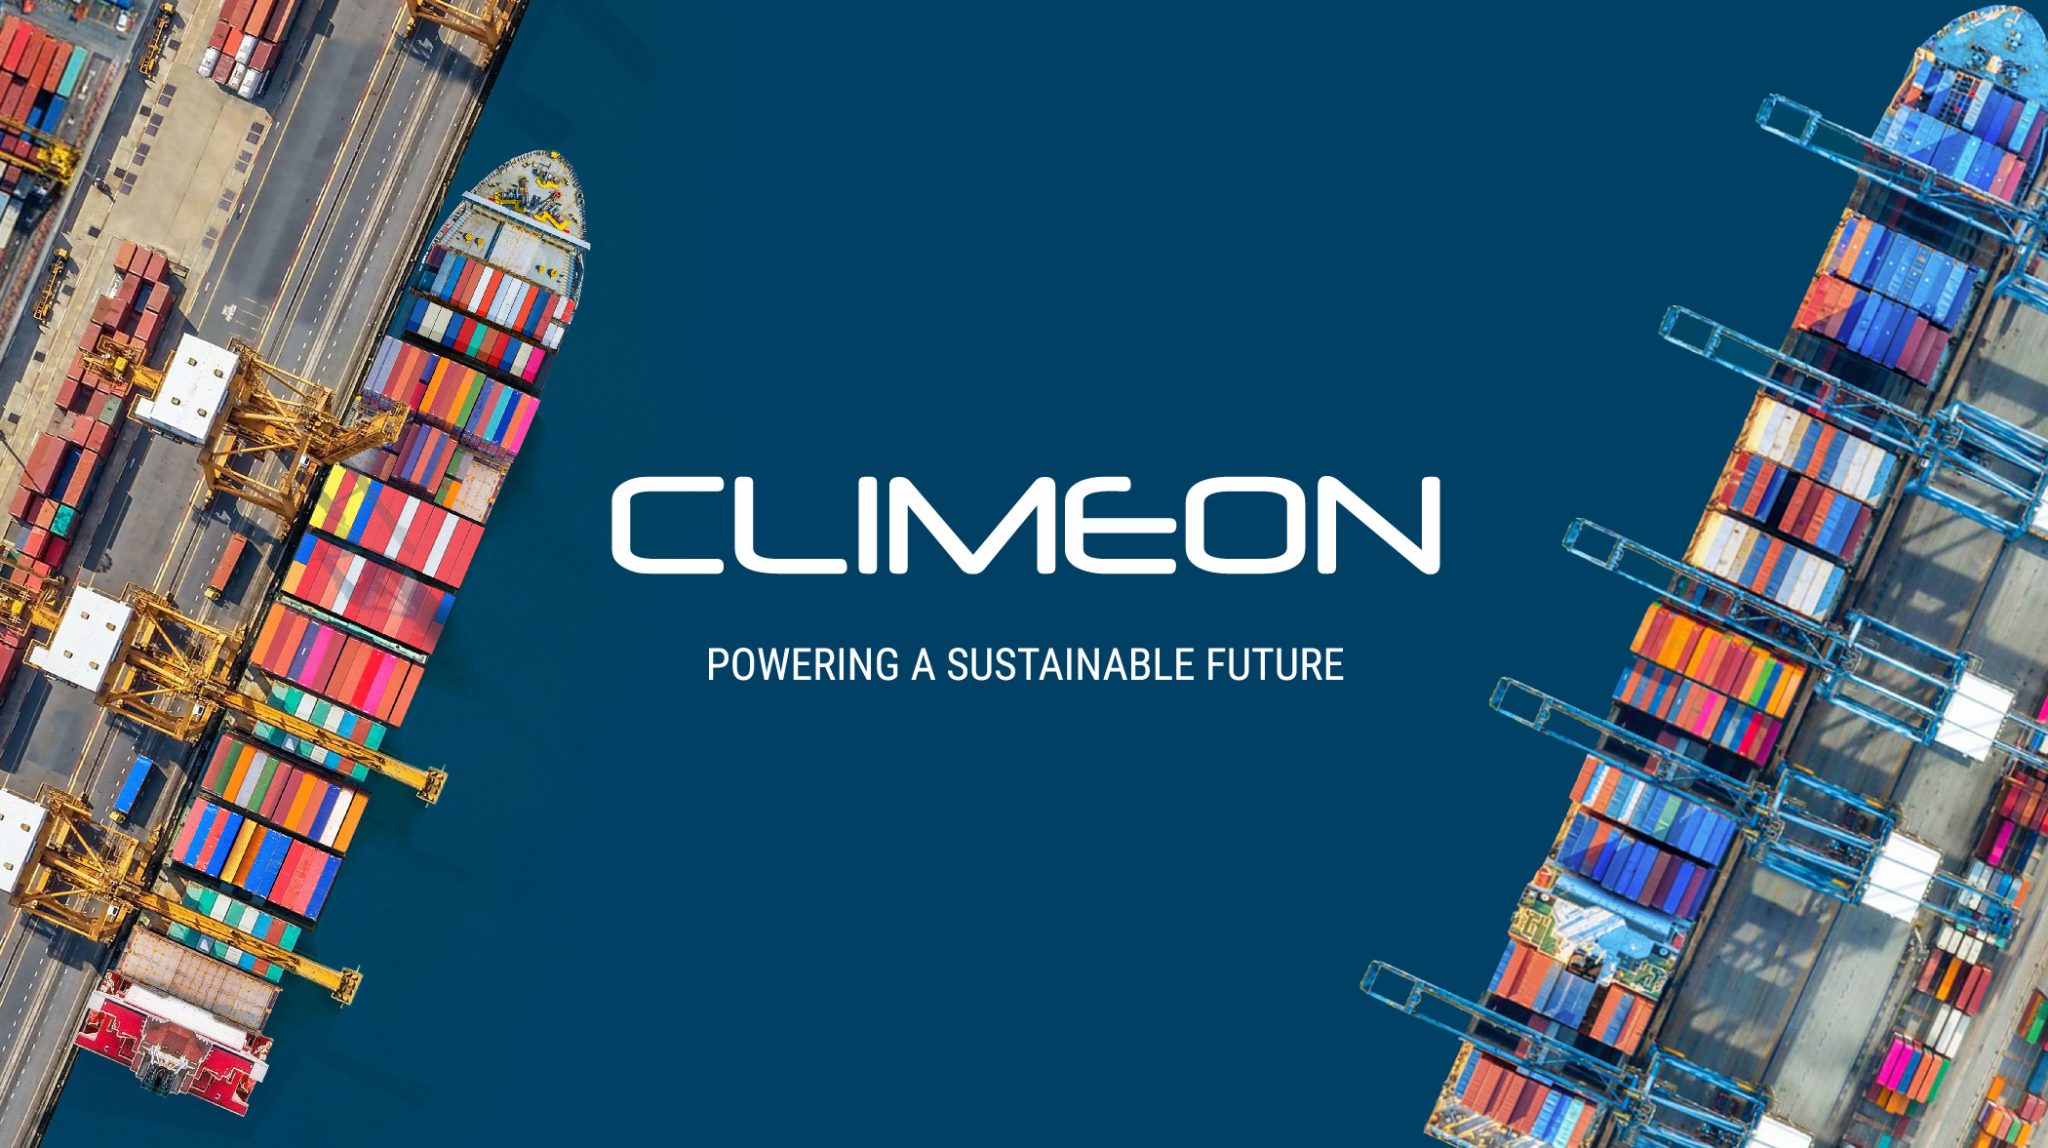 Climeon Signs 1 MEUR HeatPower 300 Order with a Global Leader in Sustainable Shipping for Existing Container Vessels